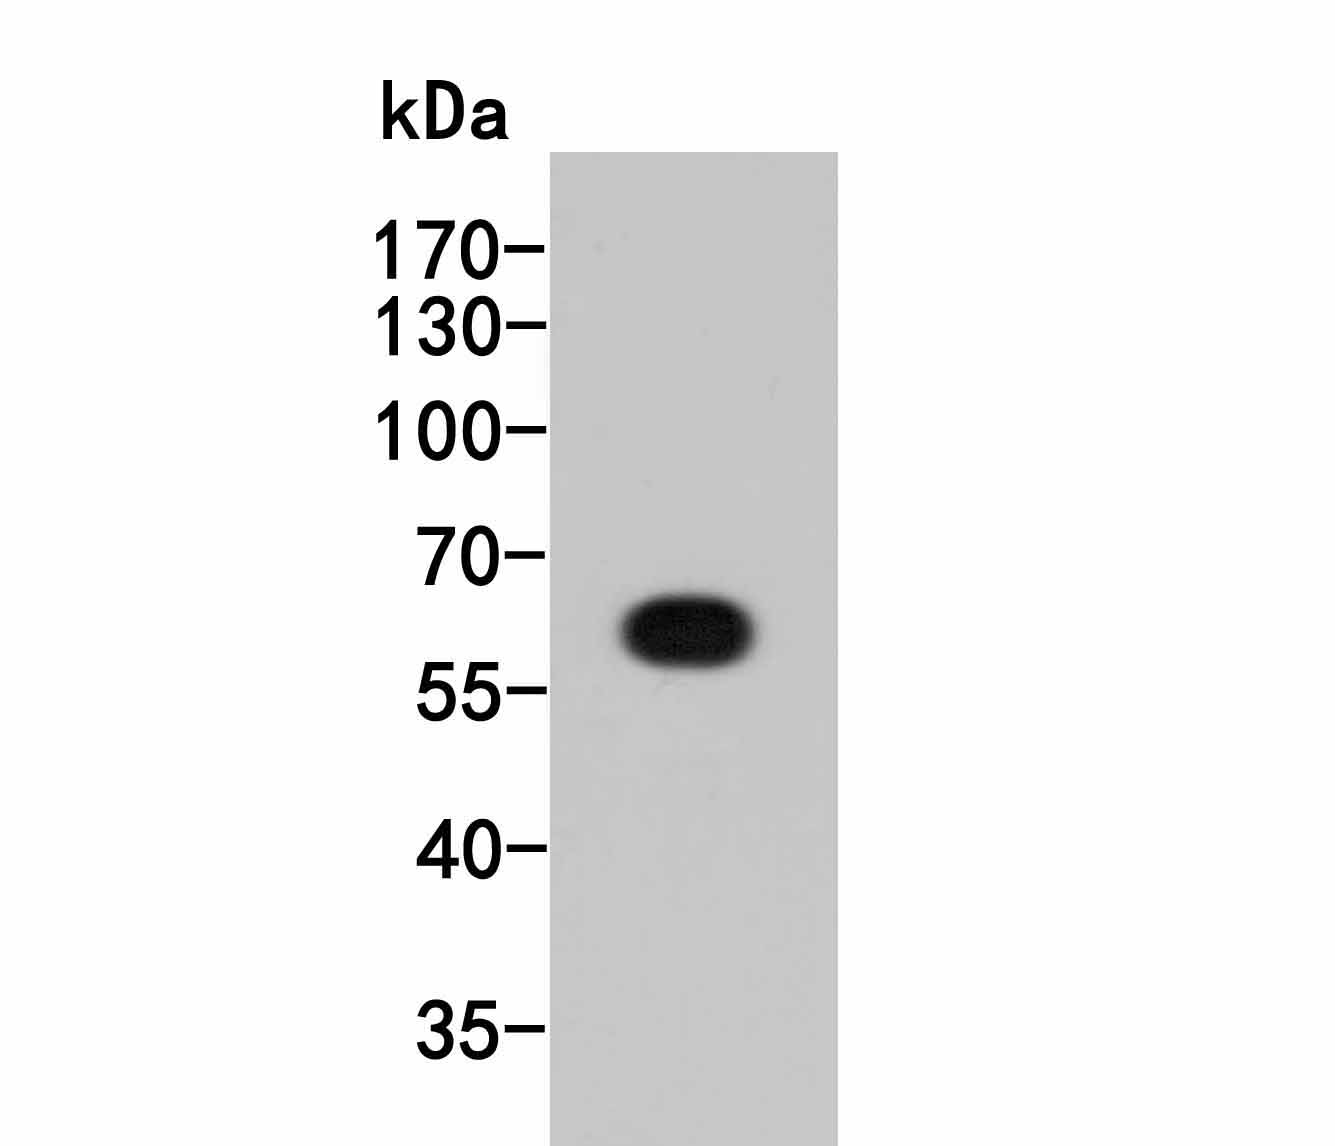 Western blot analysis of HA tag on HA tag recombinant protein. Proteins were transferred to a PVDF membrane and blocked with 5% BSA in PBS for 1 hour at room temperature. The primary antibody (ET1611-49, 1/1,000) was used in 5% BSA at room temperature for 2 hours. Goat Anti-Rabbit IgG - HRP Secondary Antibody (HA1001) at 1:5,000 dilution was used for 1 hour at room temperature.